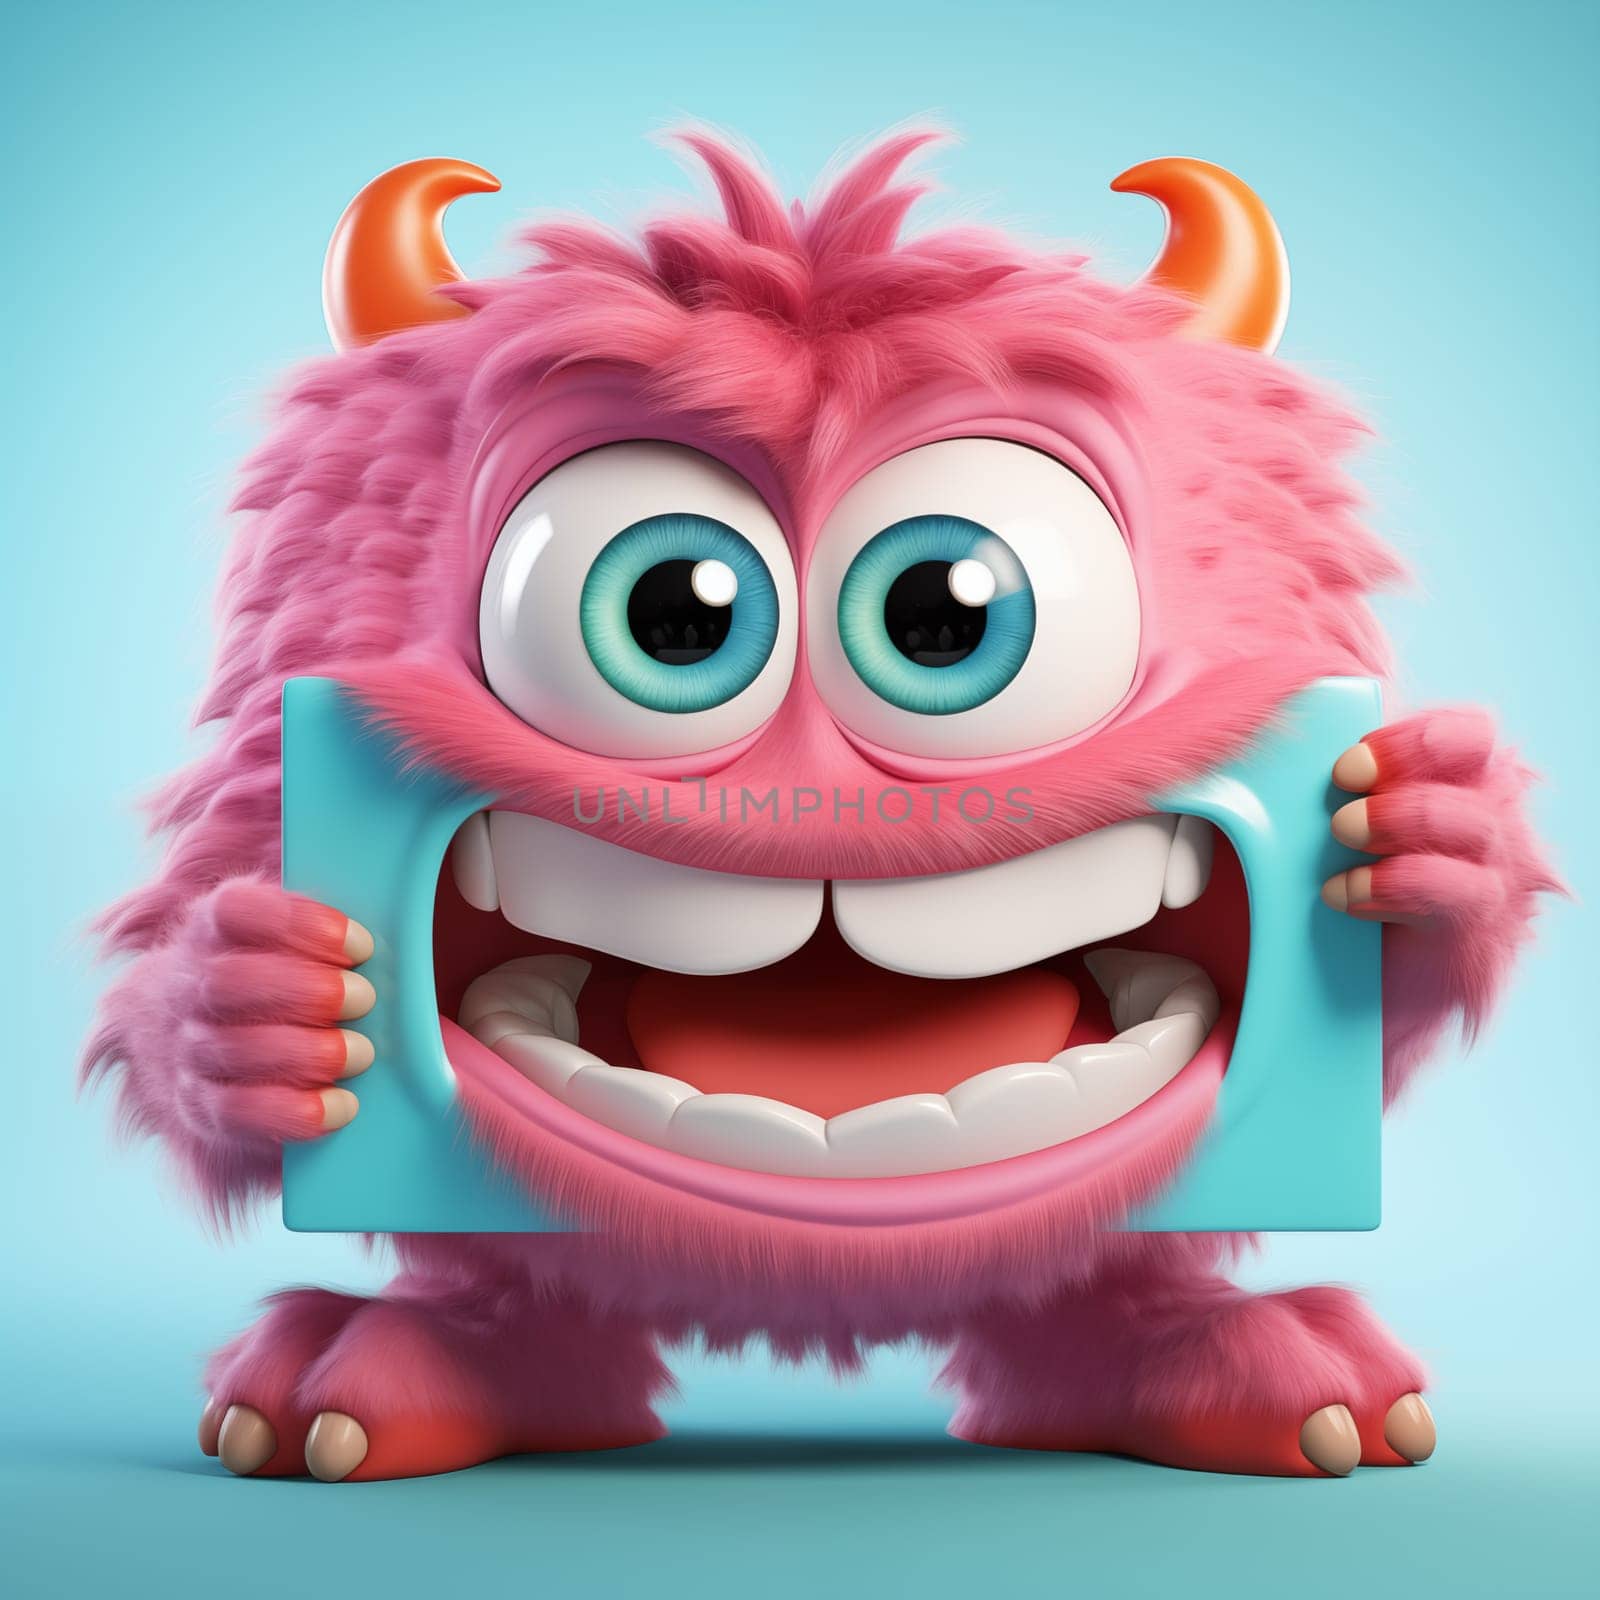 Adorable pink monster with big blue eyes, with a turquoise retractor on his mouth, with perfect white teeth by Zakharova